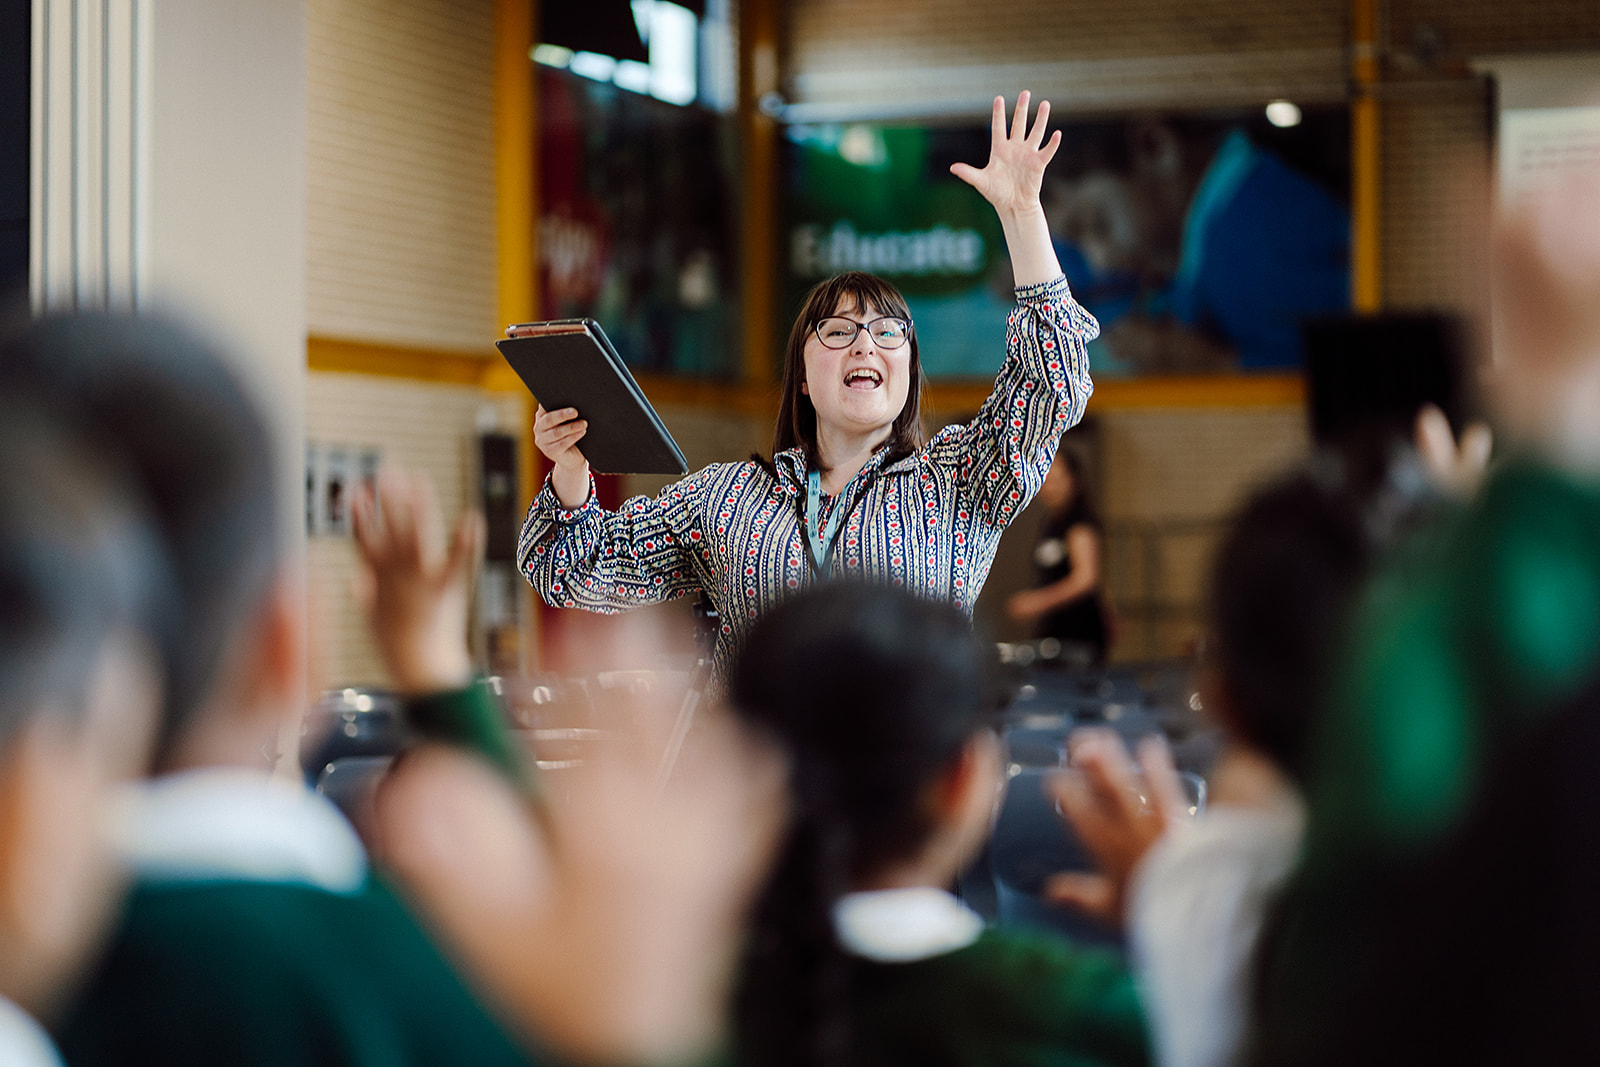 A joyful teacher with glasses and a patterned shirt enthusiastically raises her hand while holding a tablet, leading a classroom of students who are out of focus in the foreground. The setting suggests an interactive and lively educational environment, likely involving music or active participation, as indicated by the students' raised hands responding to the teacher's gesture.